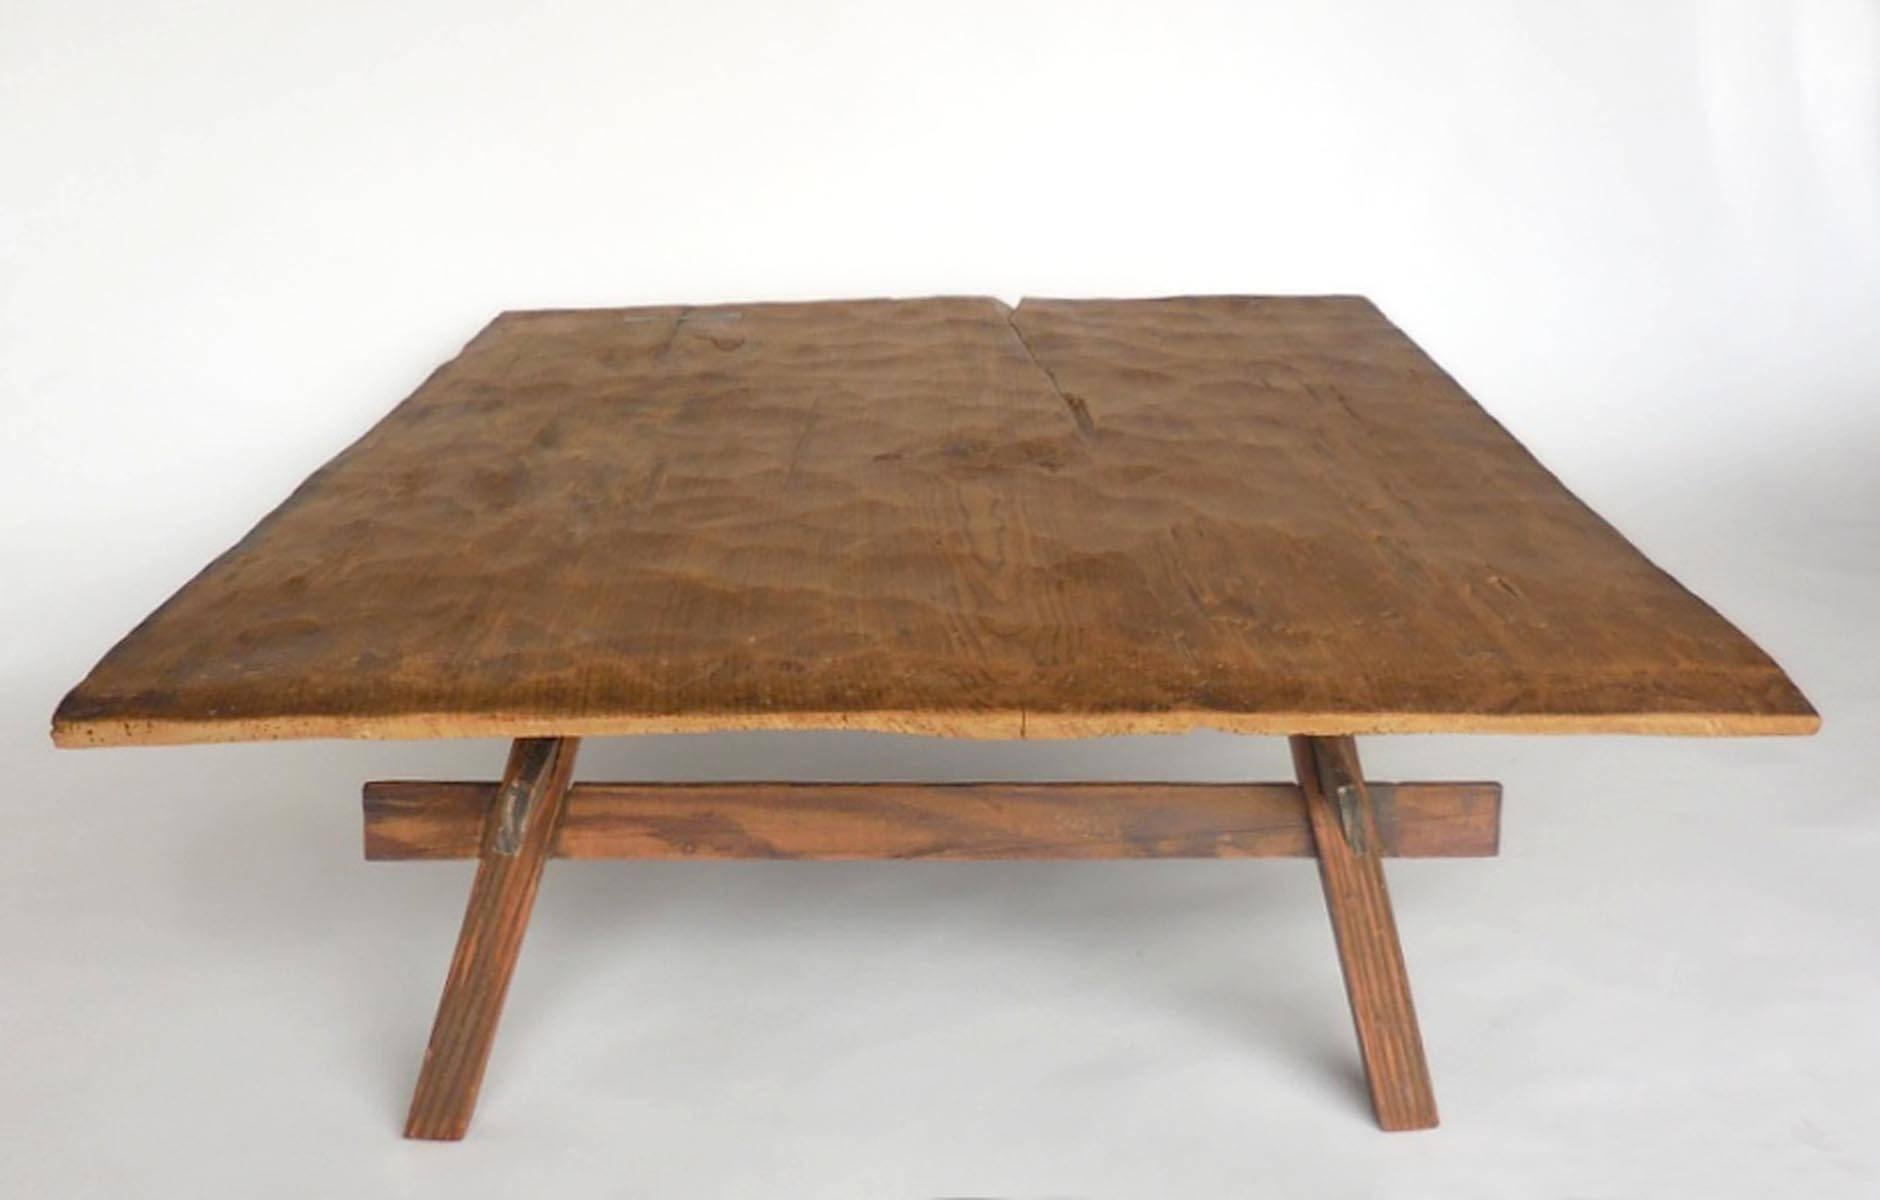 Wood Rustic Coffee Table with Straight Legs